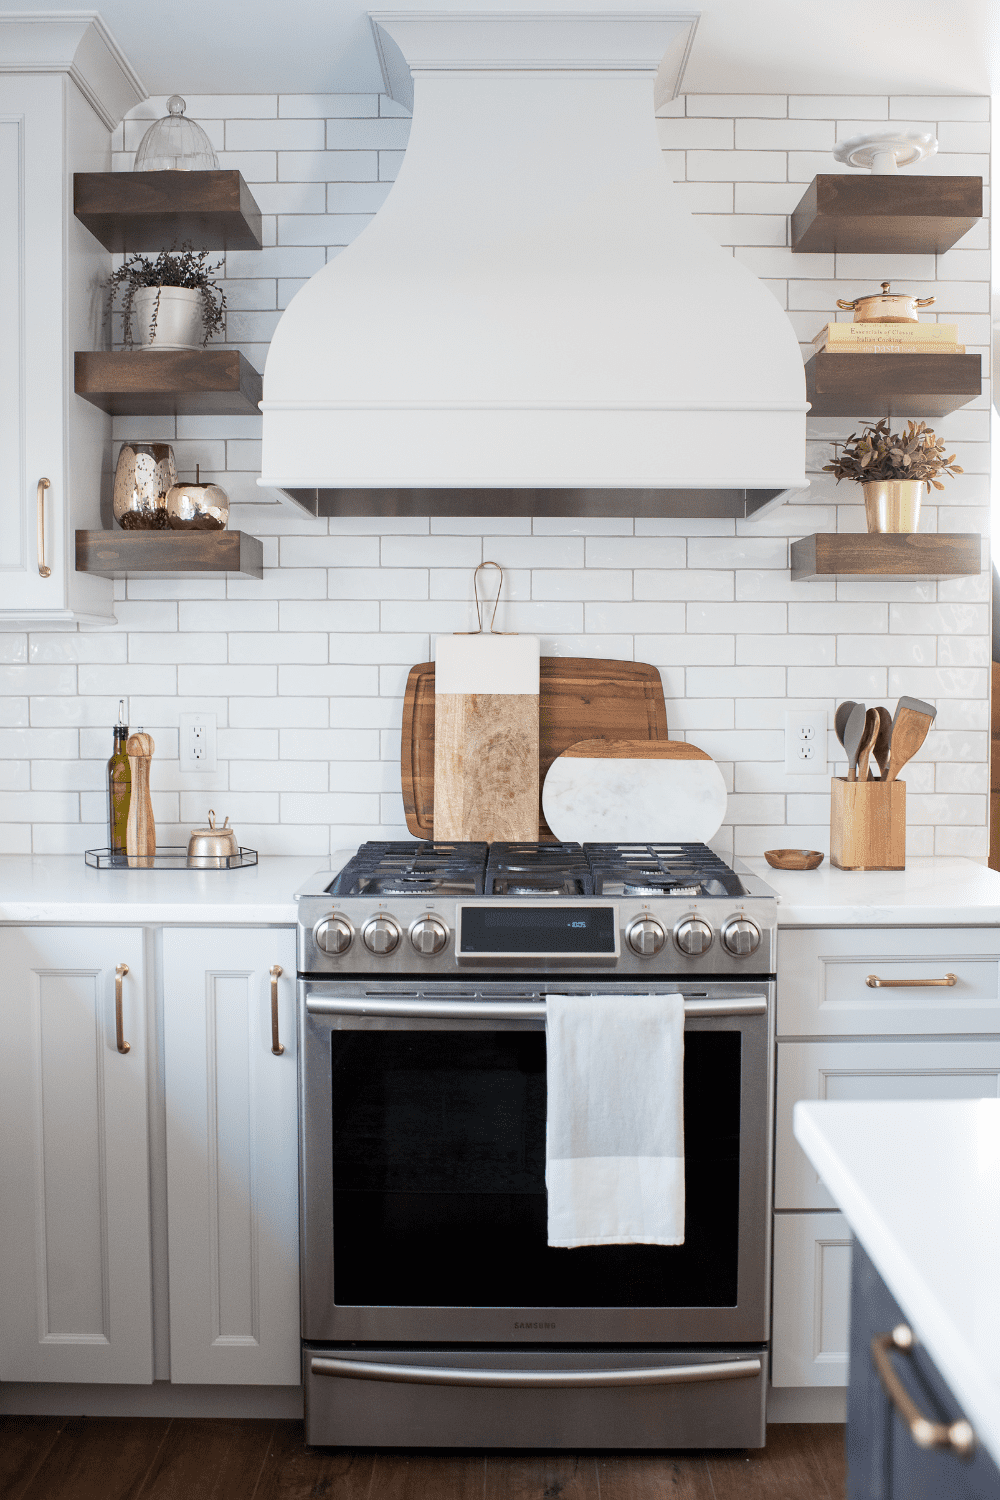 Nicholas Design Build | A neutral kitchen with wooden shelves and a stove.